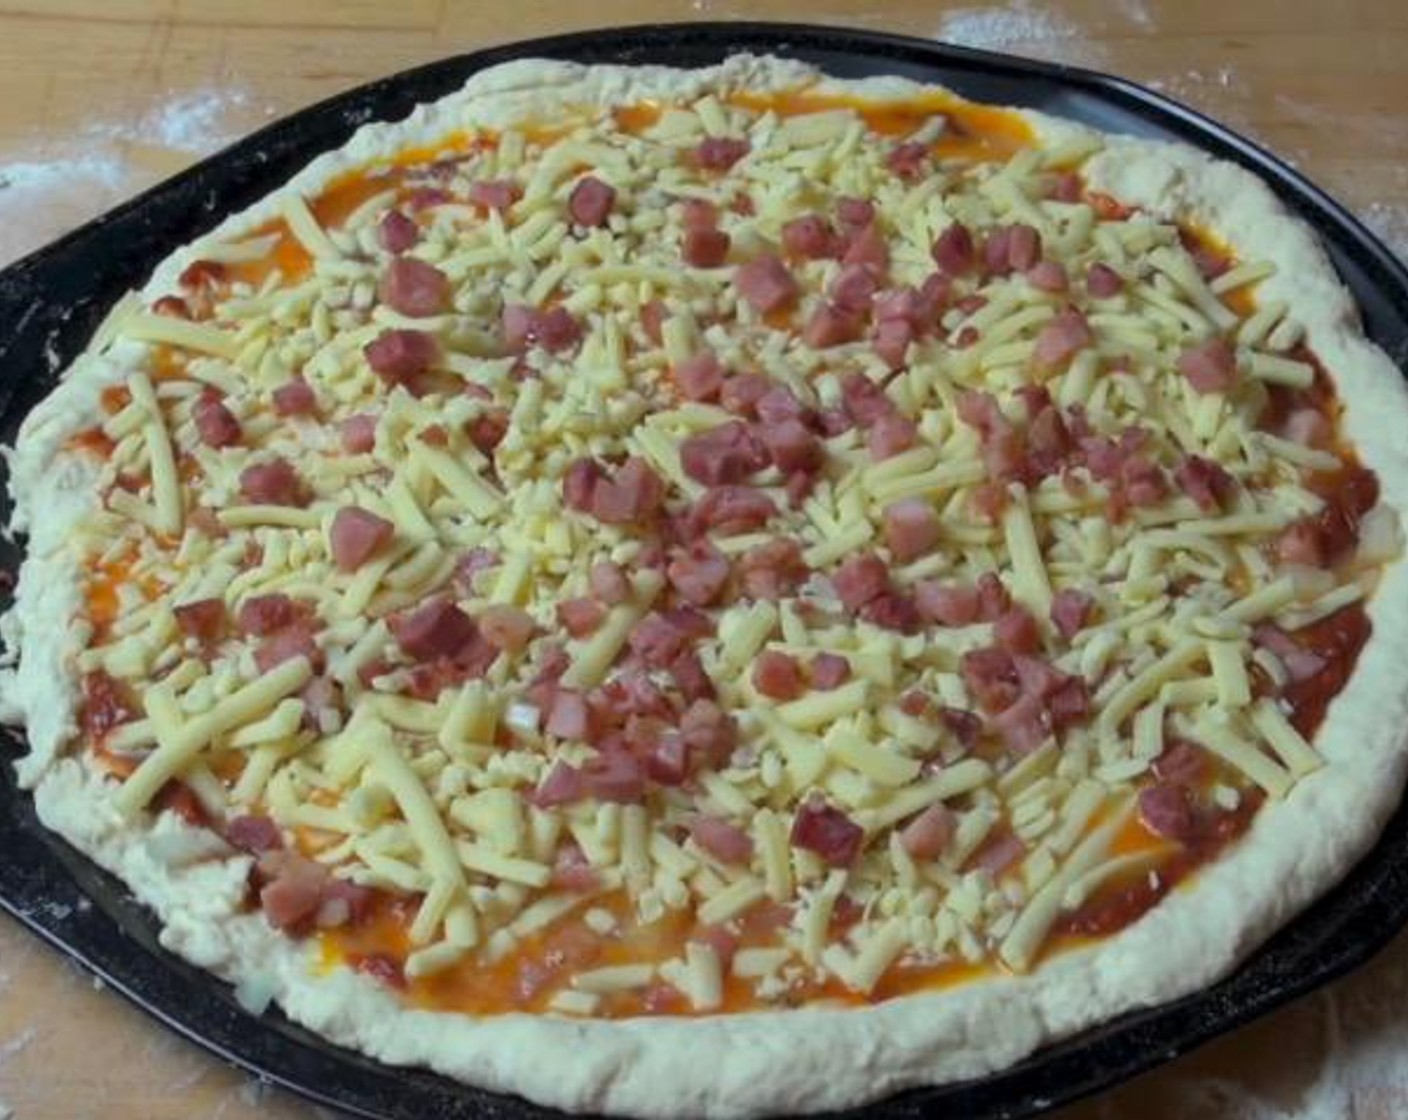 step 3 Top dough with Pizza Sauce (to taste), half of the lightly fried Bacon (7 oz) and Yellow Onion (1/2). Pour the Eggs (5) over top. Sprinkle Cheese (2 cups) on top, then finish with the remaining bacon.